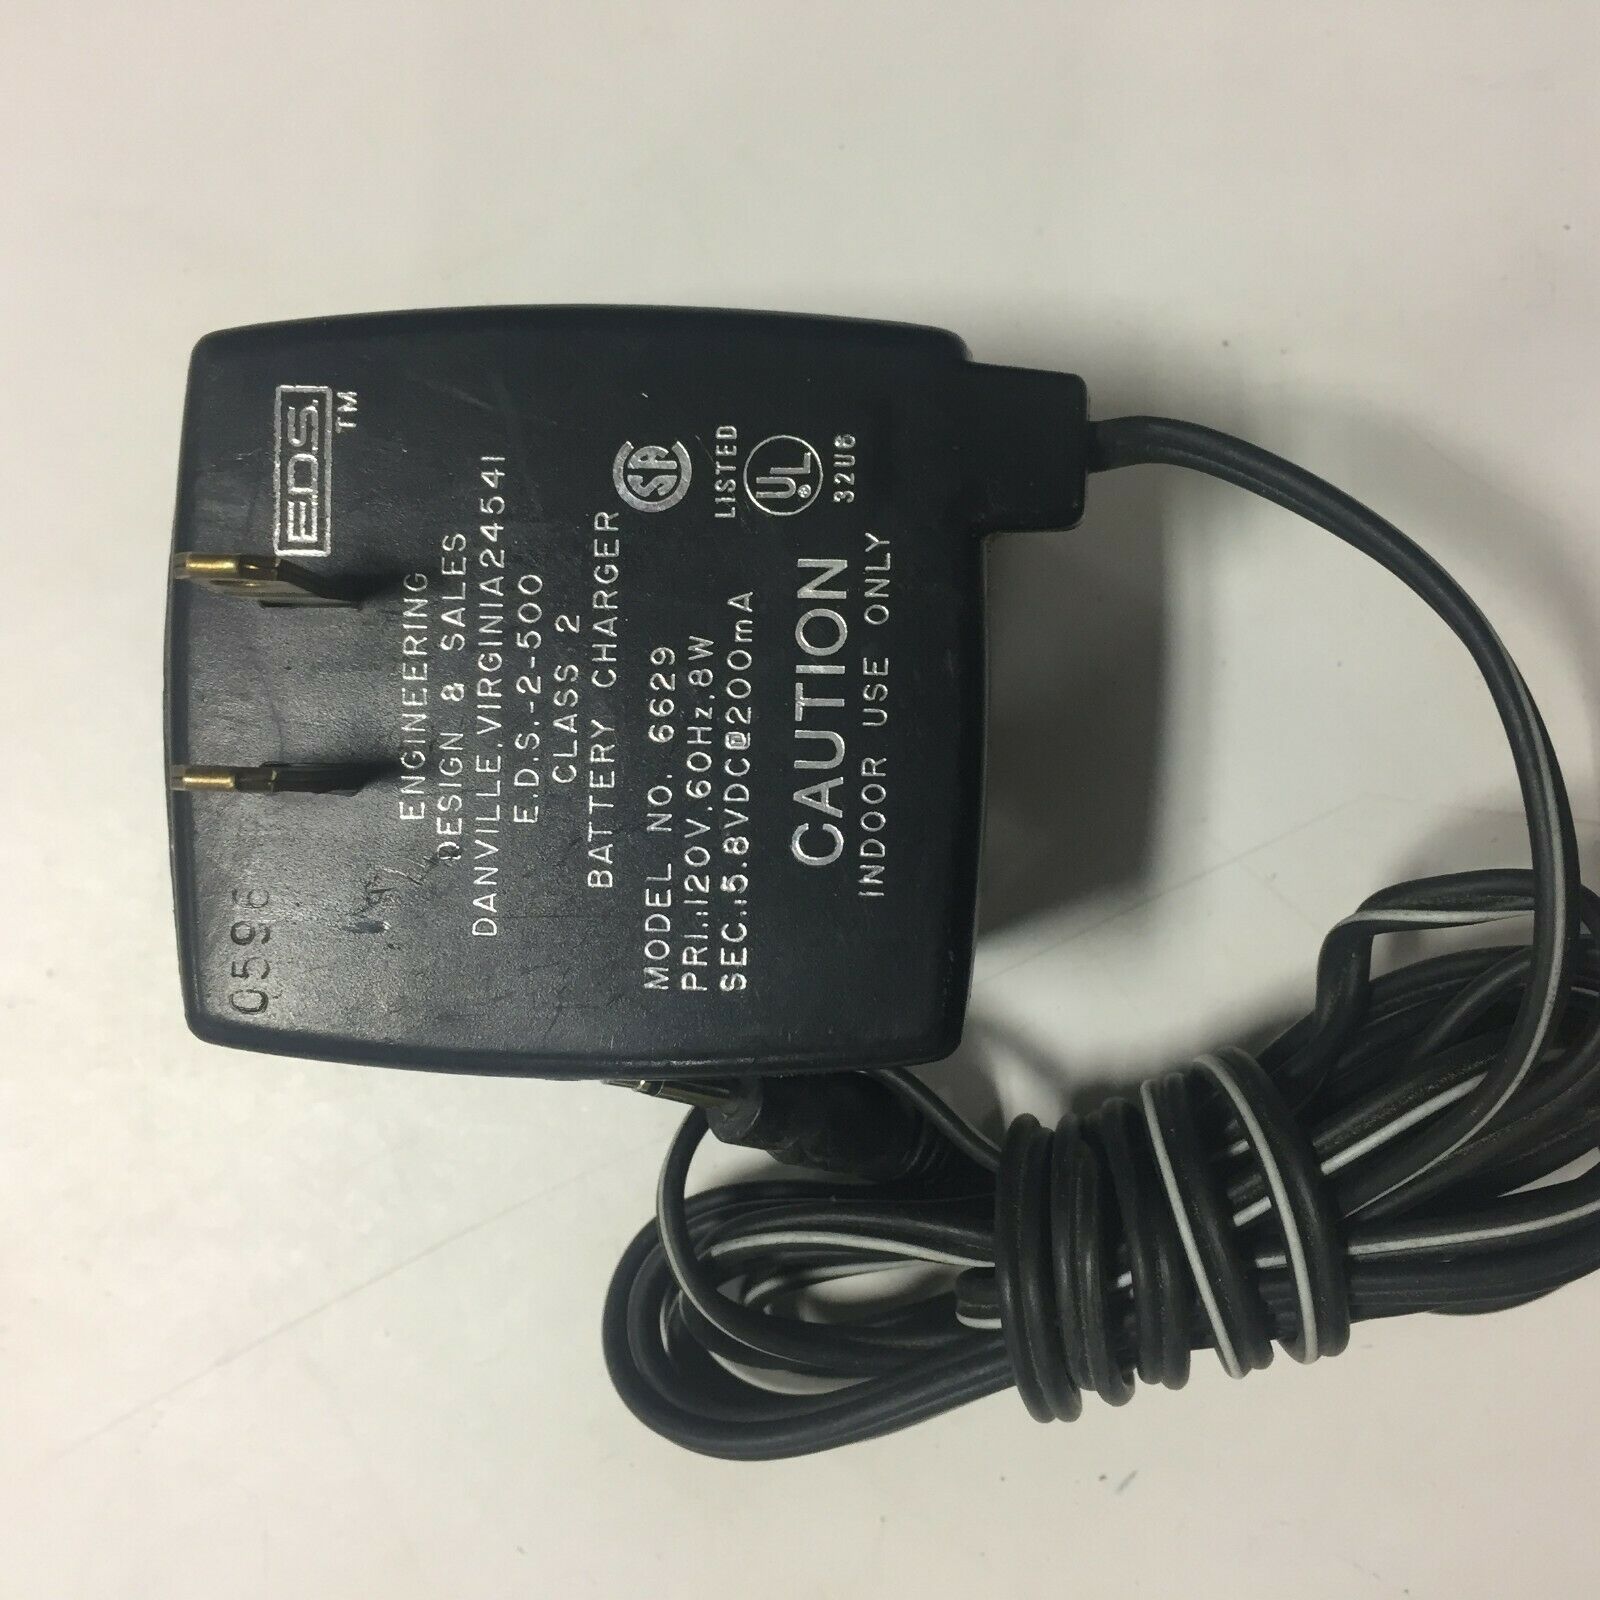 NEW ENGNEERING Power Adapter 6629 5.8V 200mA E.D.S.-2-500 AC-DC Adaptor